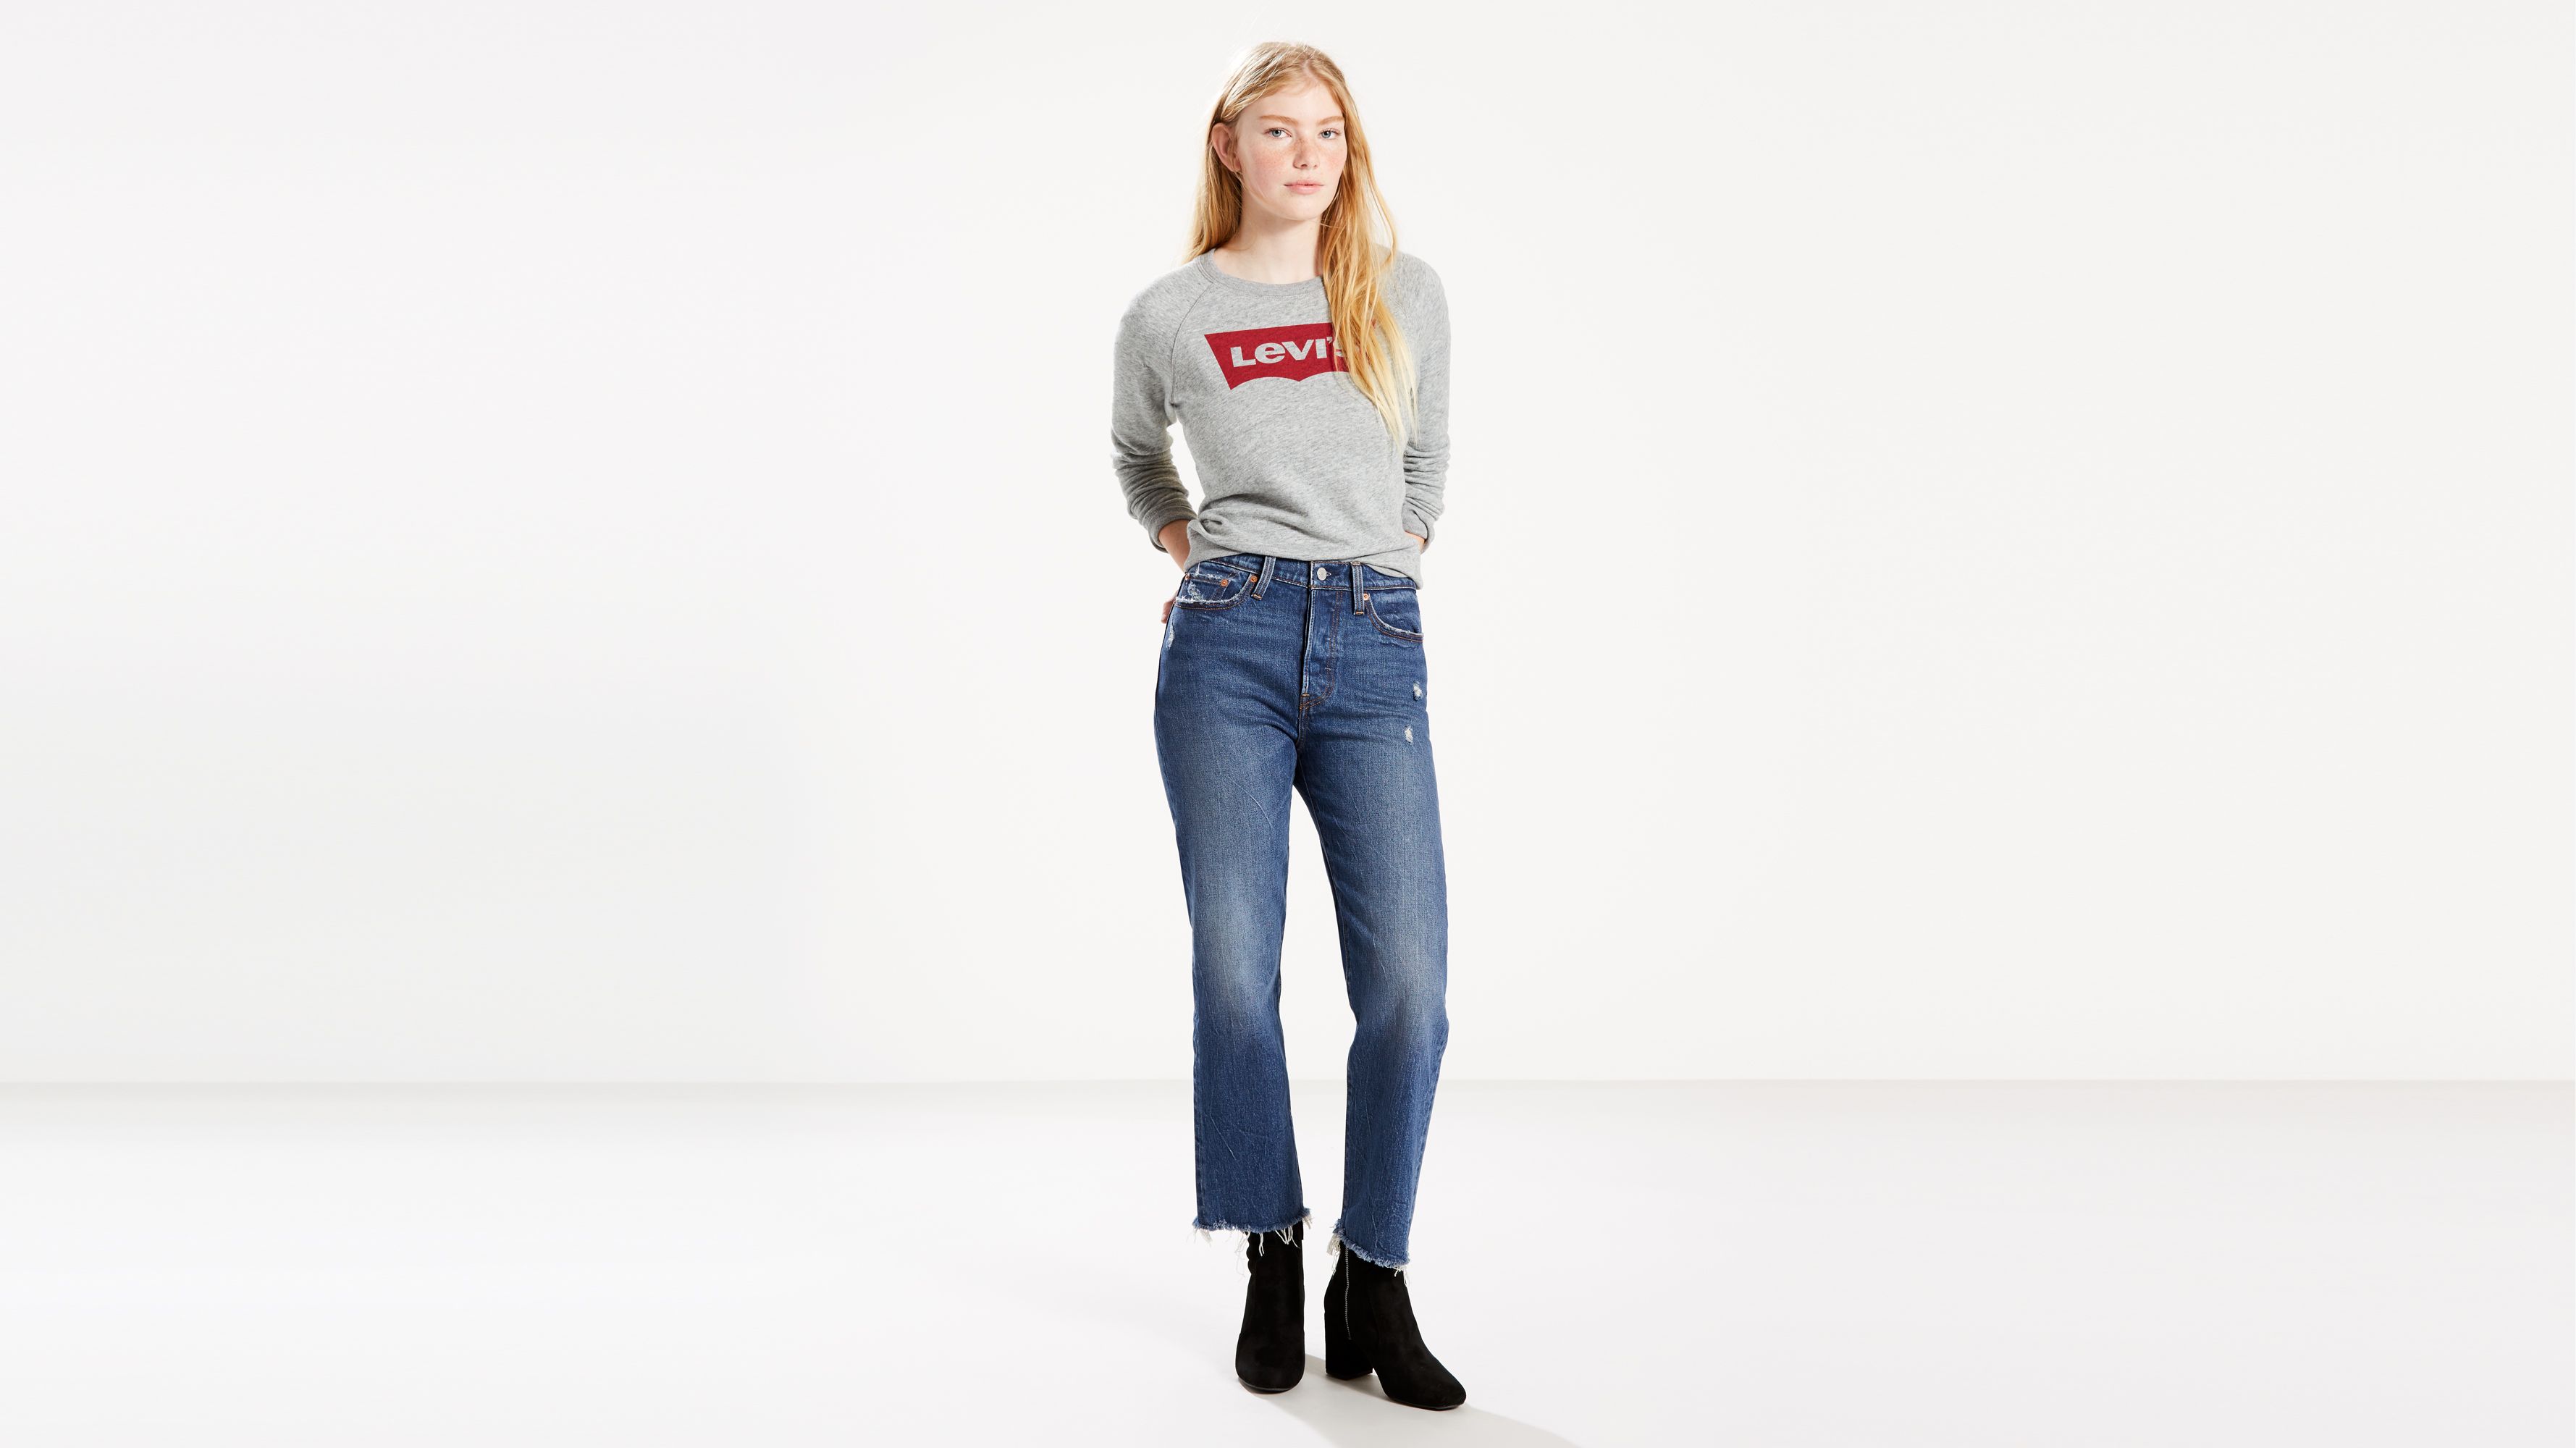 Levi's Wedgie Fit Jeans - Shop the Iconic Wedgie Jean | Levi's® US